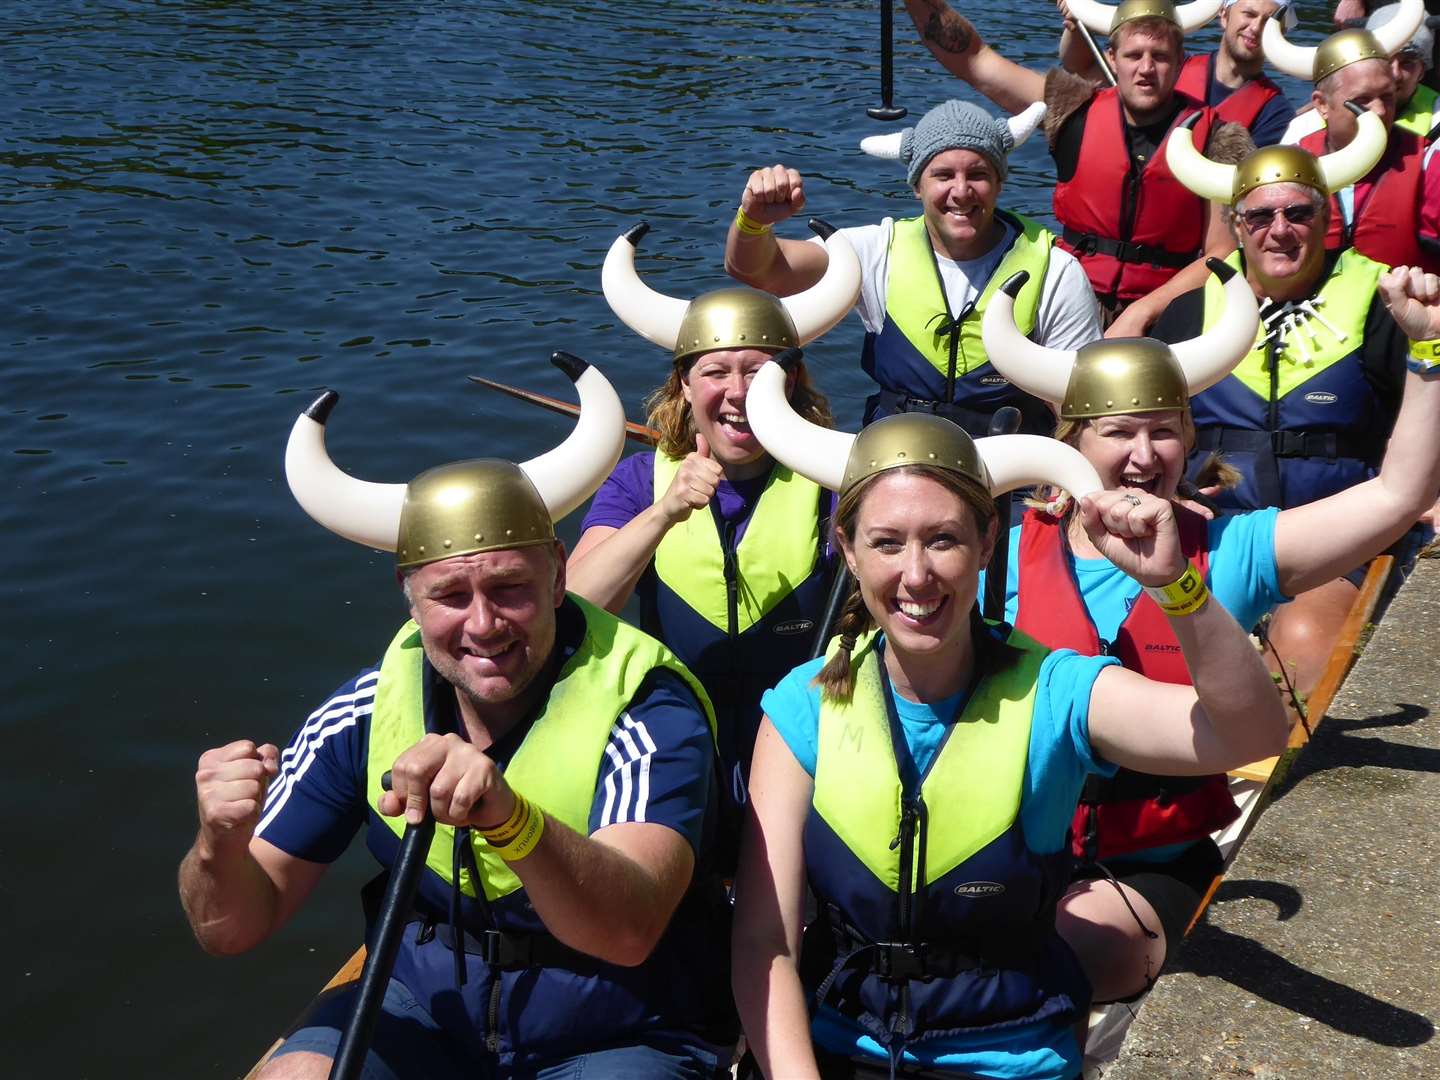 The annual KM Dragon Boat Race, organised by the KM Charity Team, raises thousands of pounds for Kent and Medway charities.